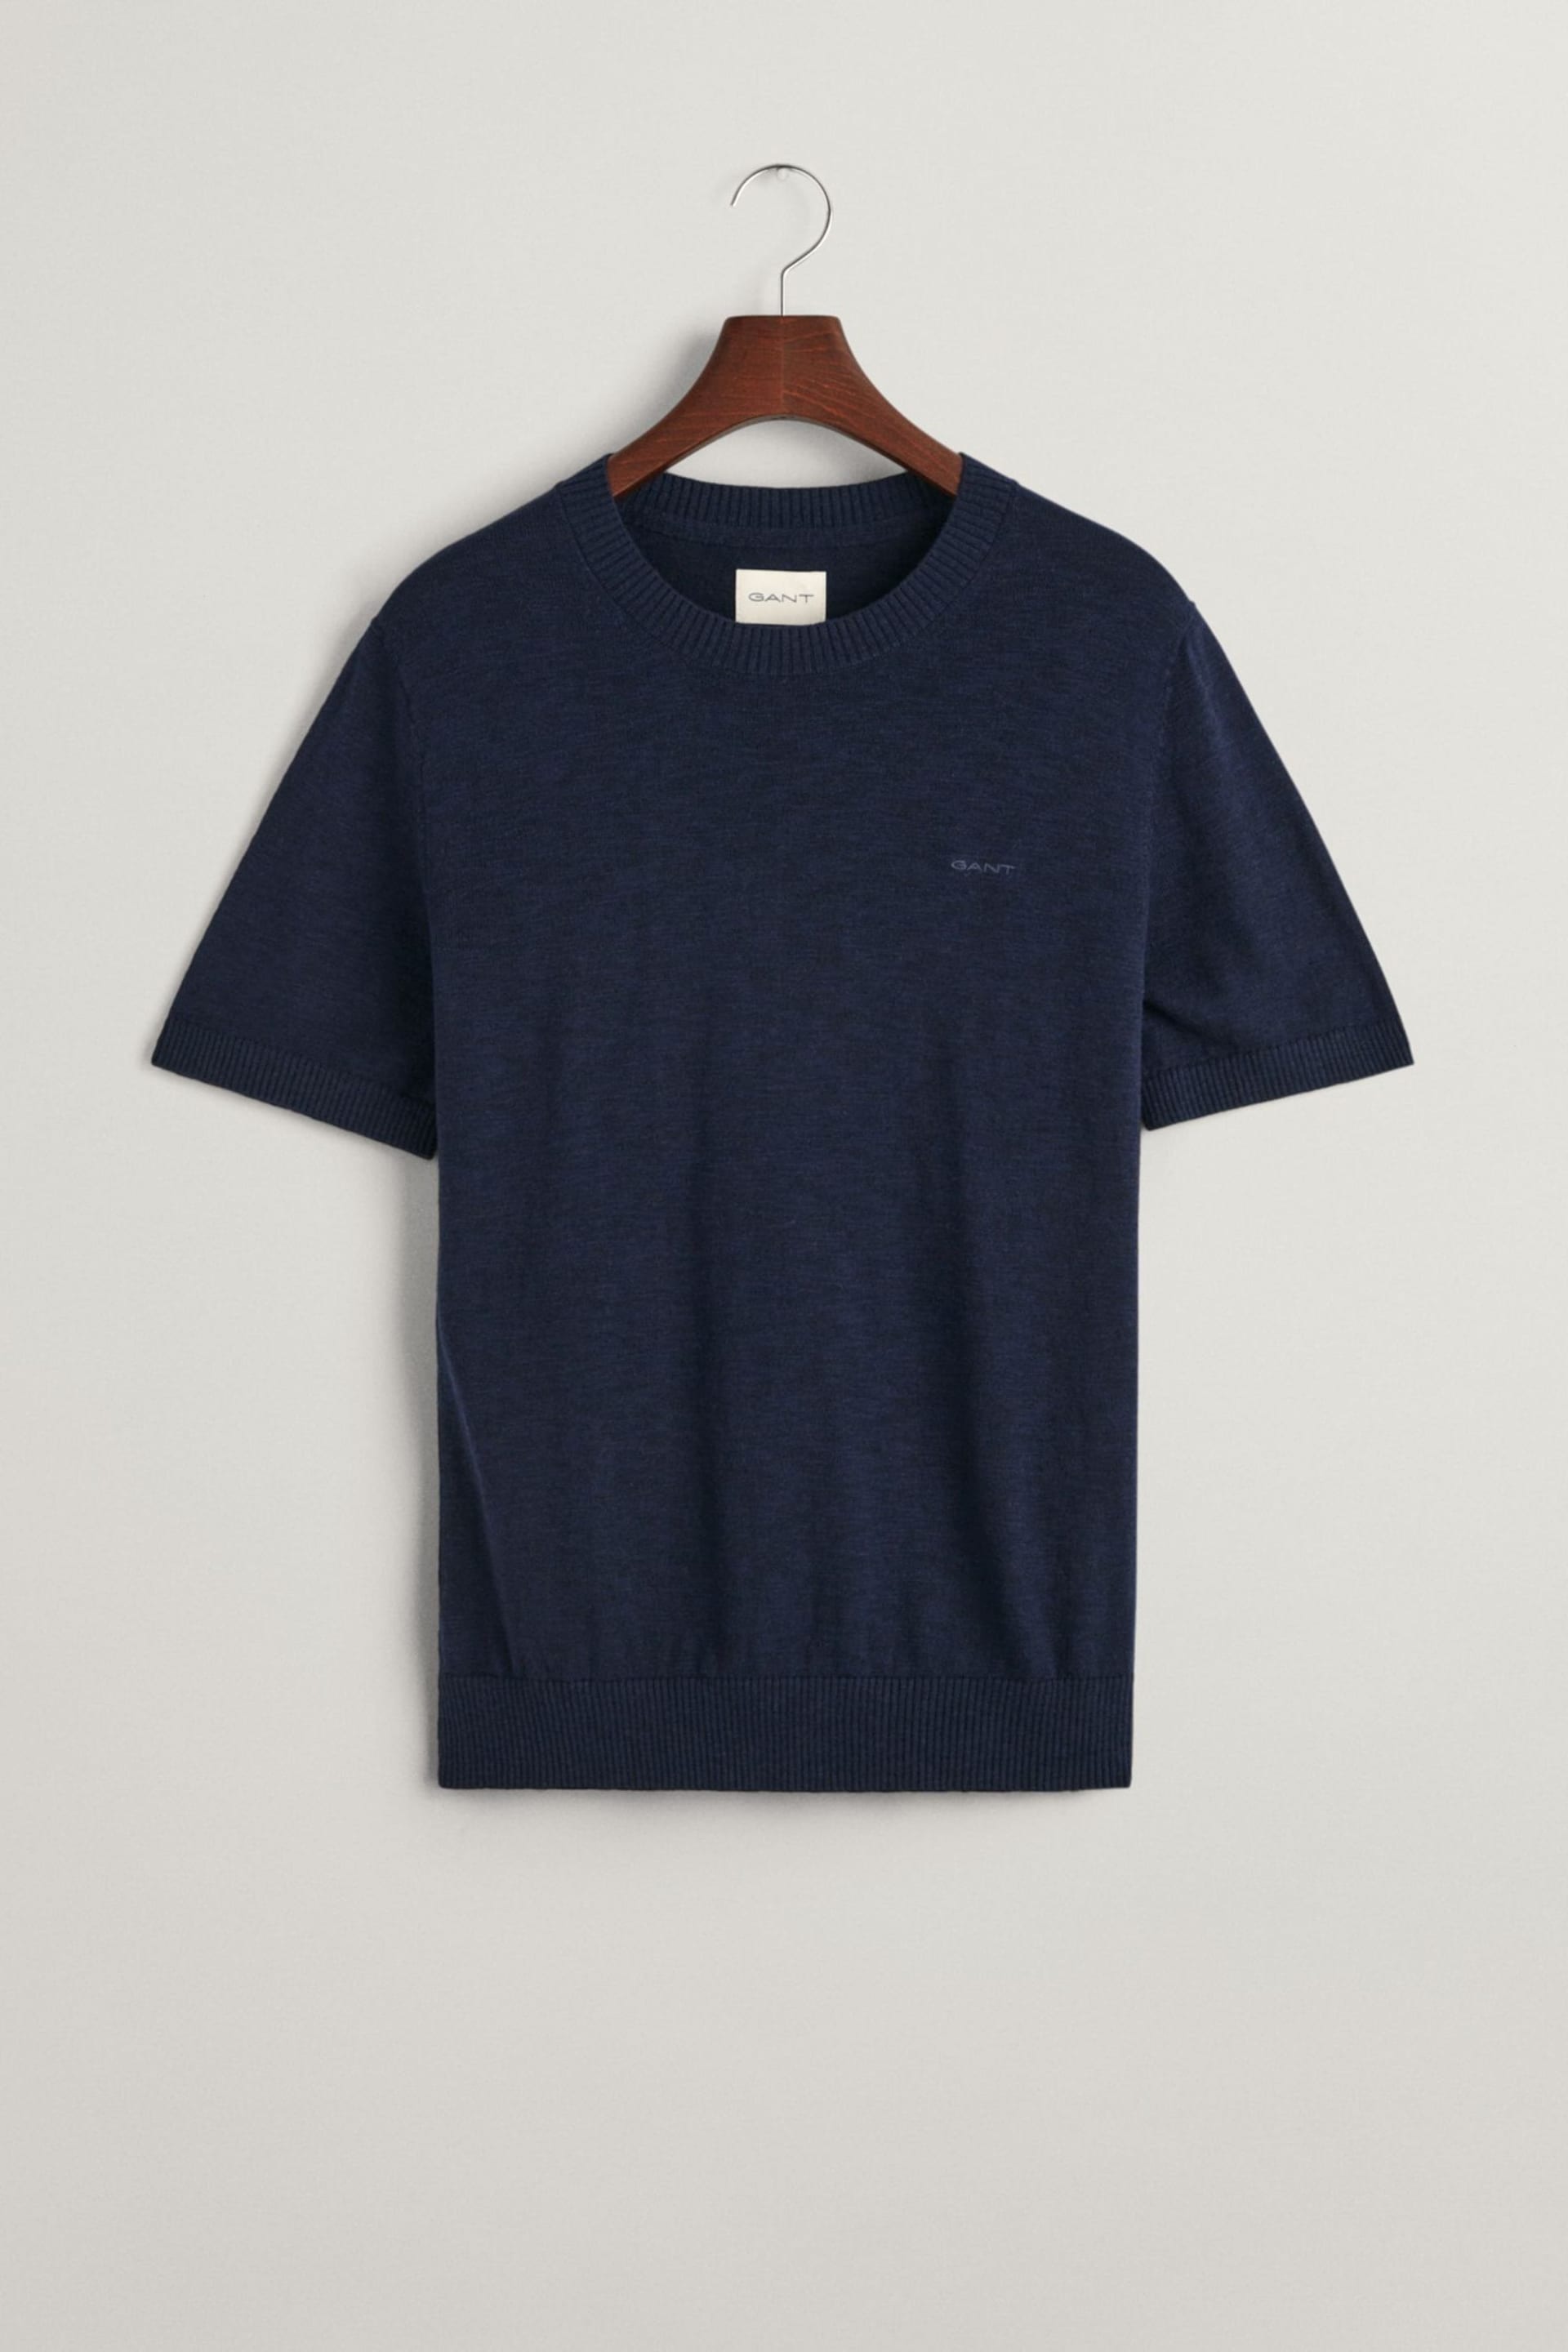 GANT Knitted Cotton Linen T-Shirt - Image 5 of 5